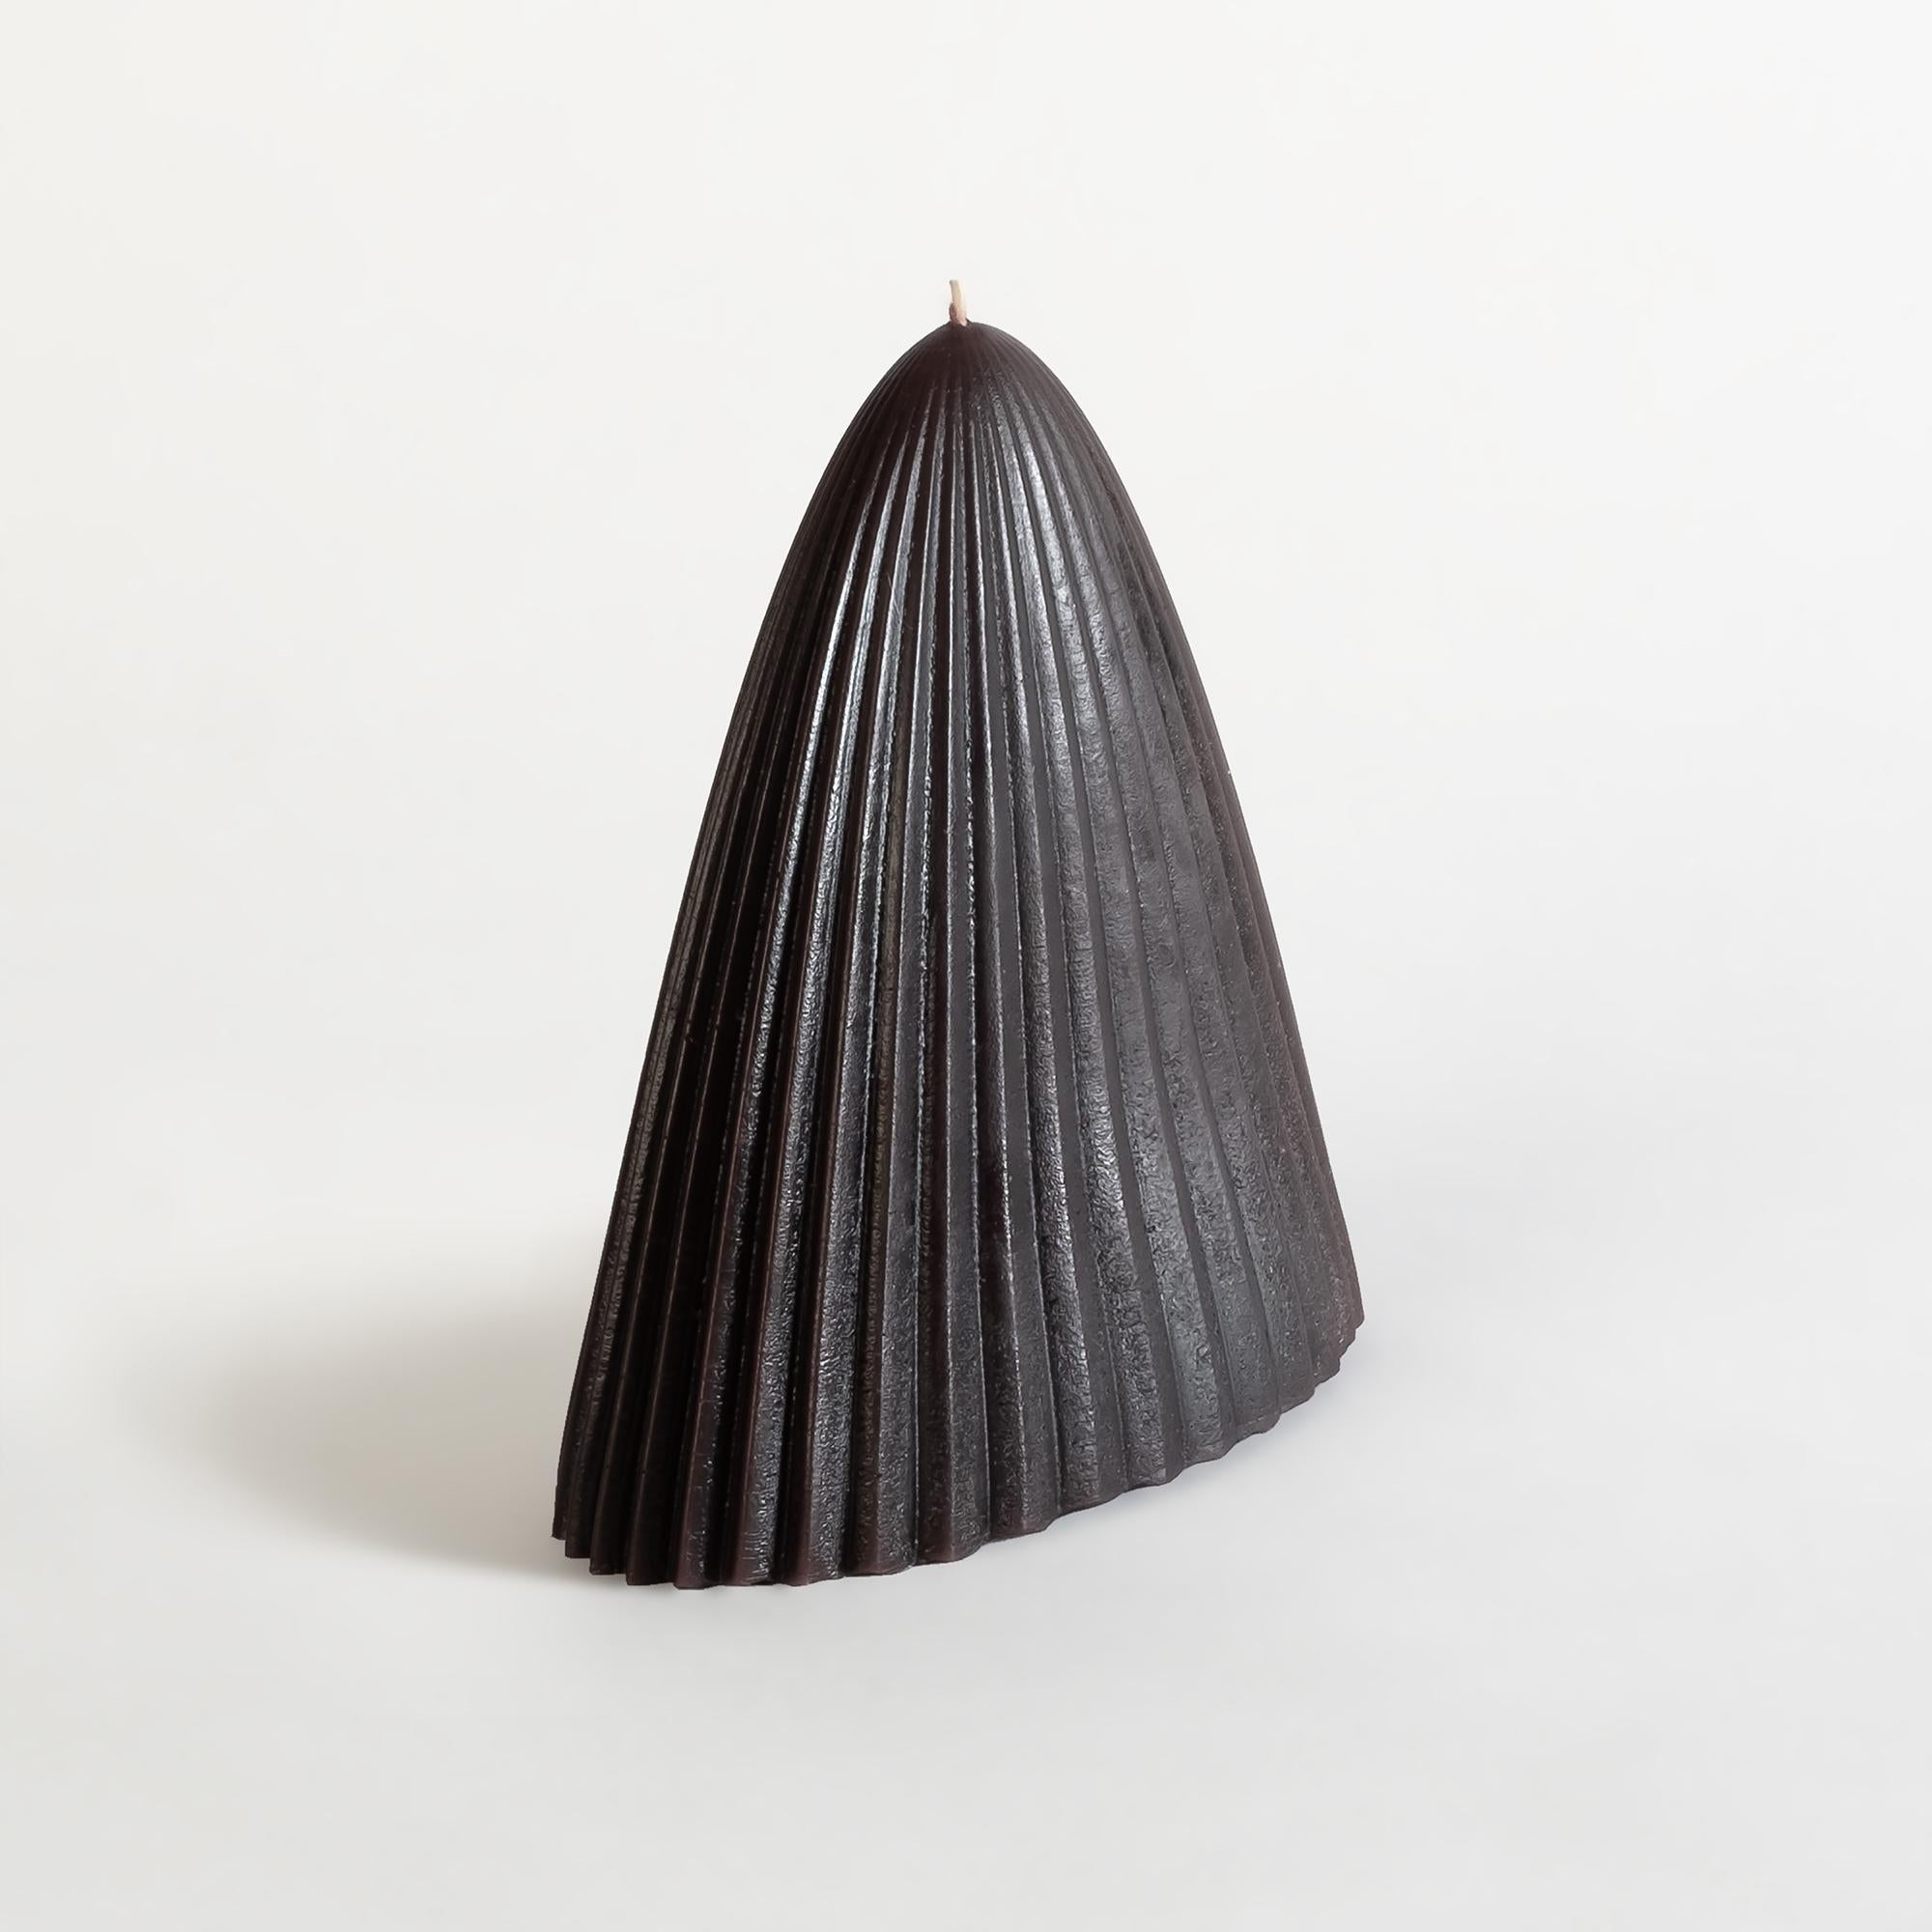 Contemporary Tusk Candle, Small, Black Beeswax For Sale